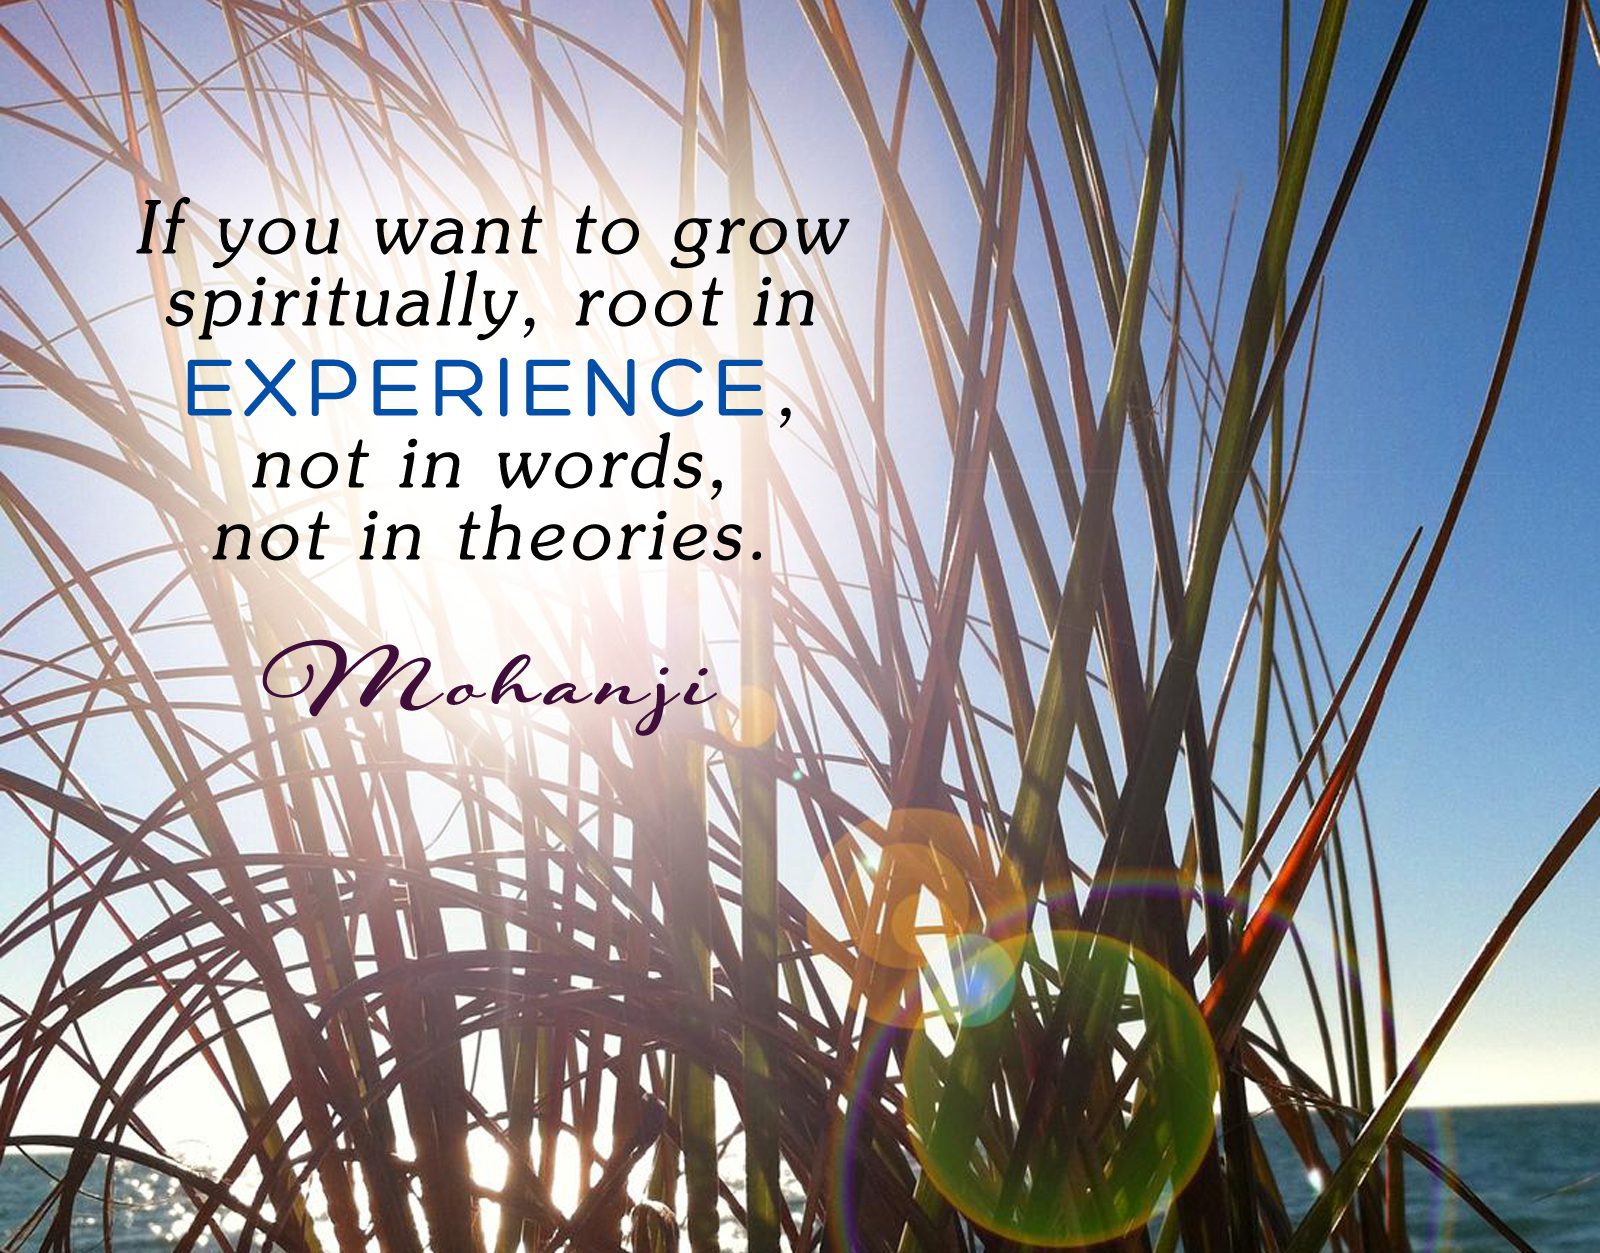 Mohanji quote - If you want to grow spiritually, root in experience